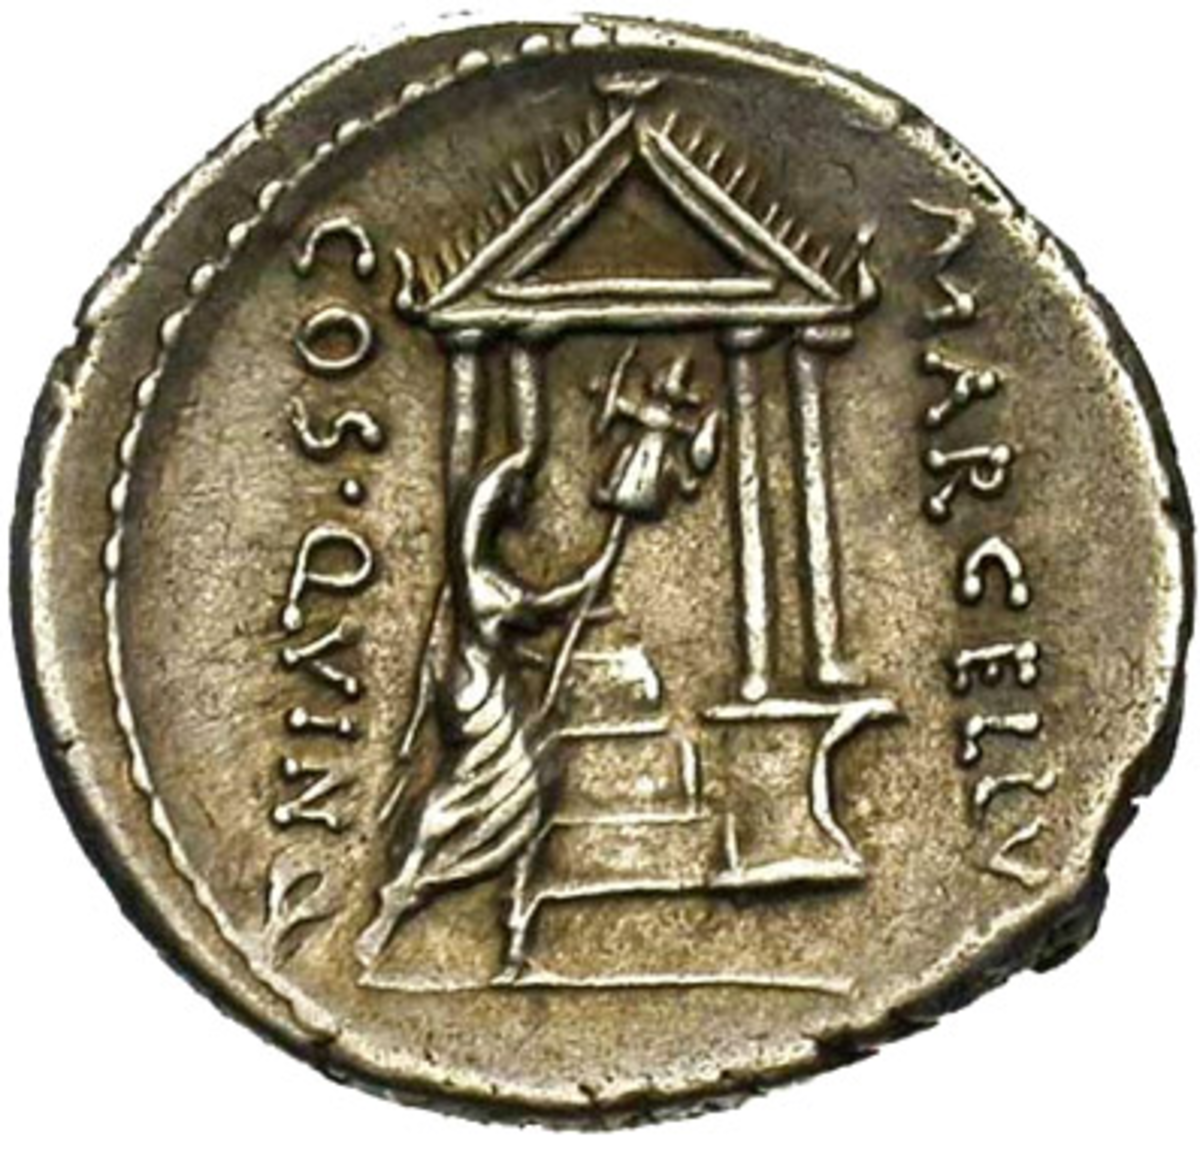 Depiction of the Temple of Jupiter Feretrius on a silver denarius of Lentulus Marcellinus from the first century BC.